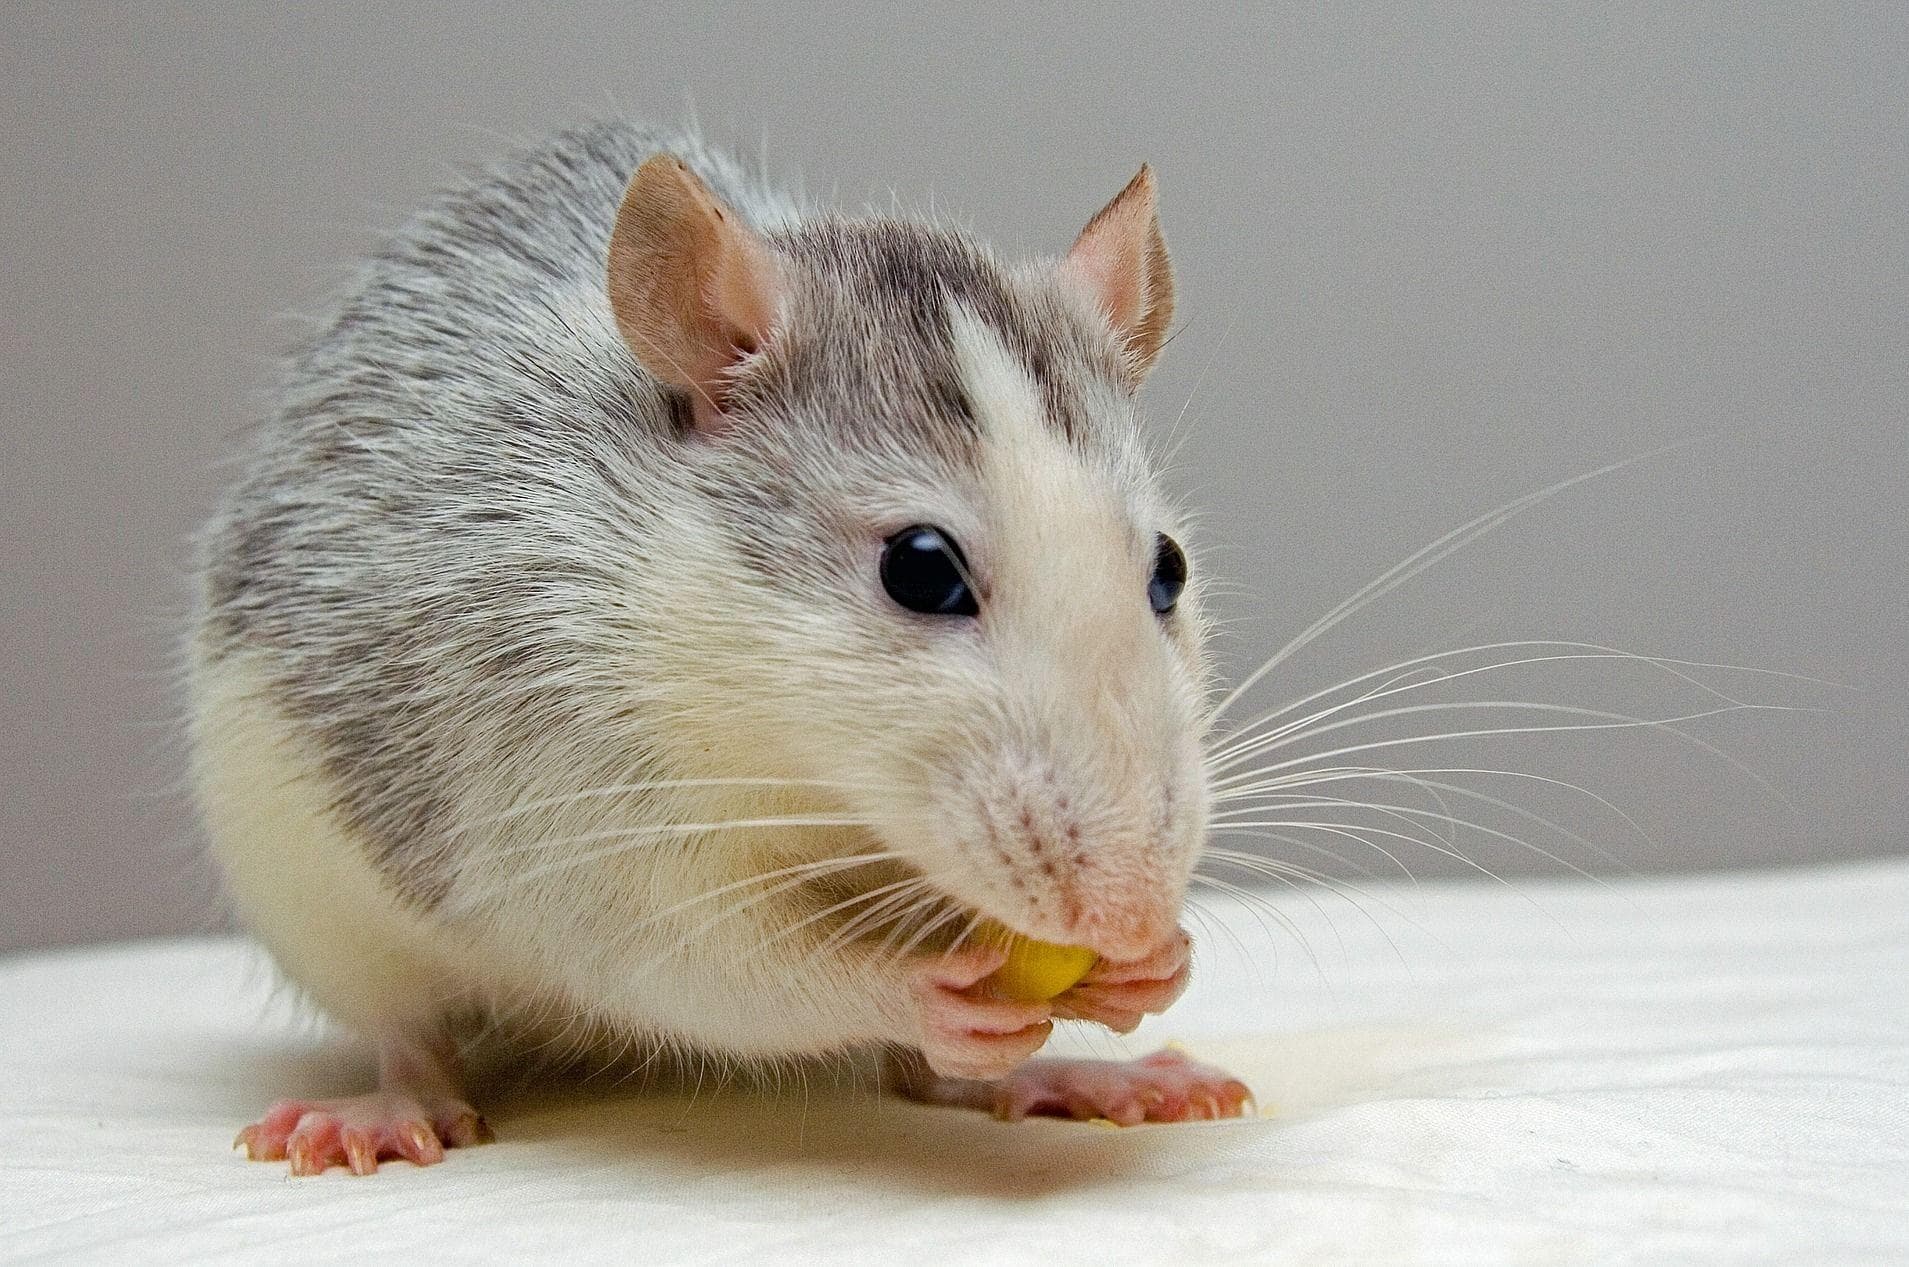 Random Facts You Didn’t Know About Rats That Will Seriously Disturb You